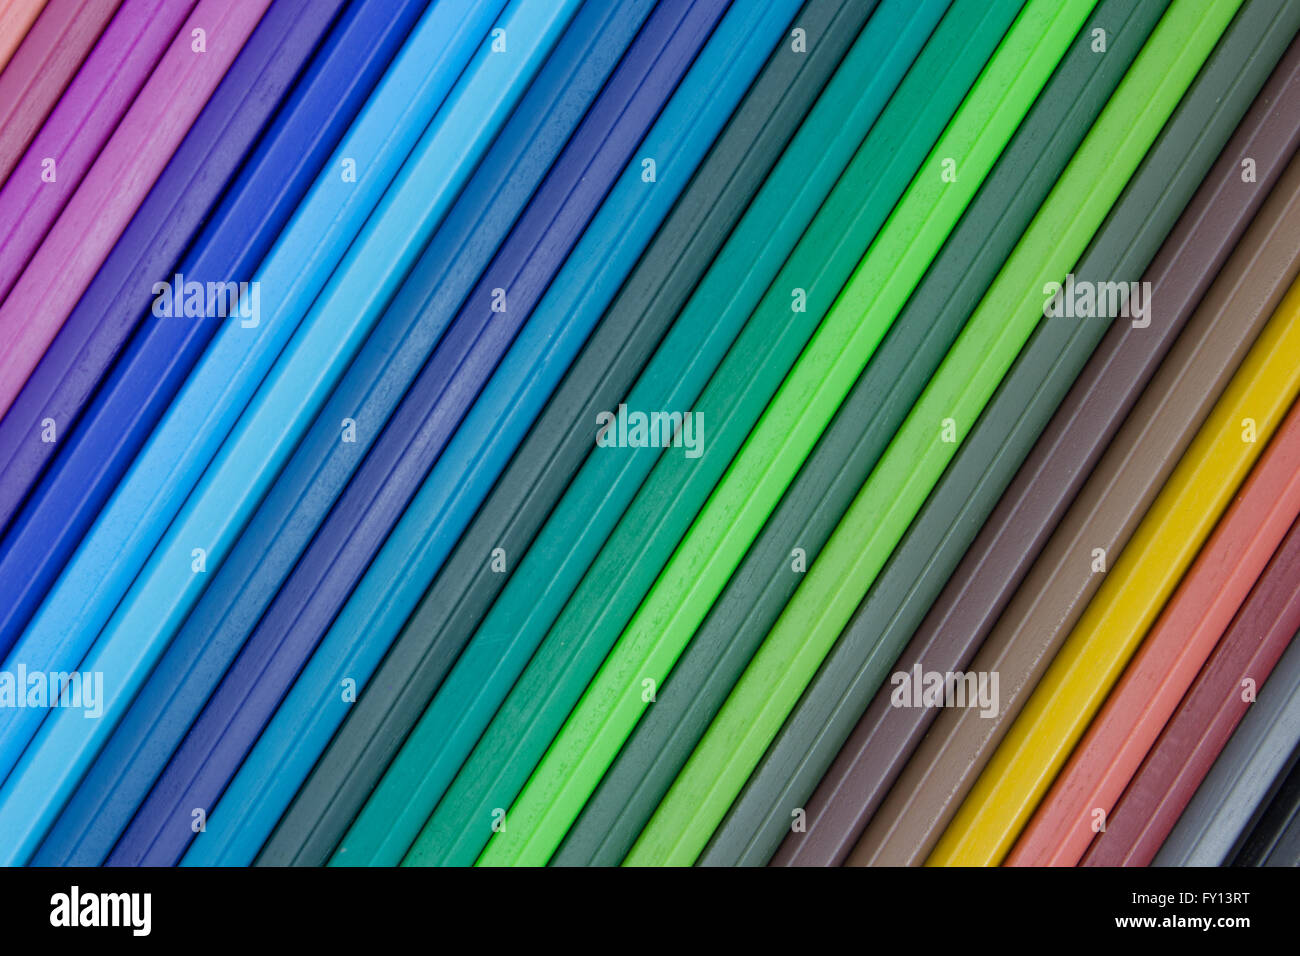 multicolored striped background - assorted color lines Stock Photo